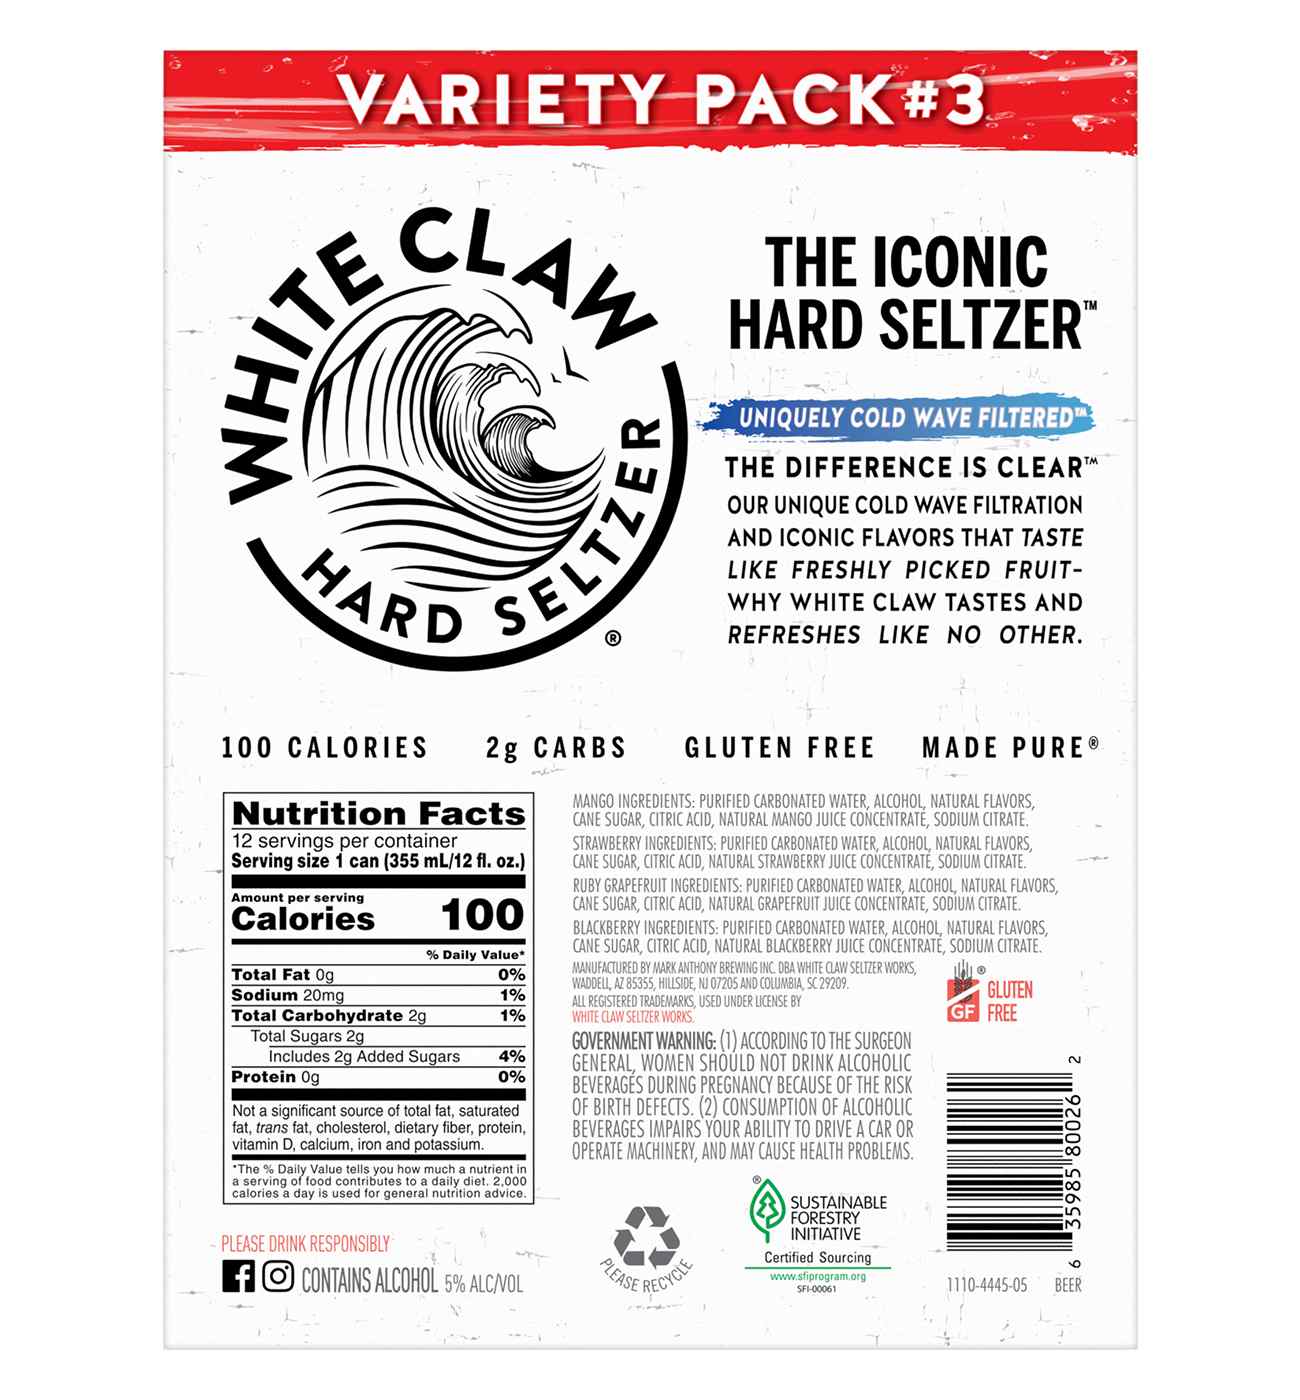 White Claw Hard Seltzer Variety Pack 12 pk Cans - Flavor Collection No. 3; image 3 of 4